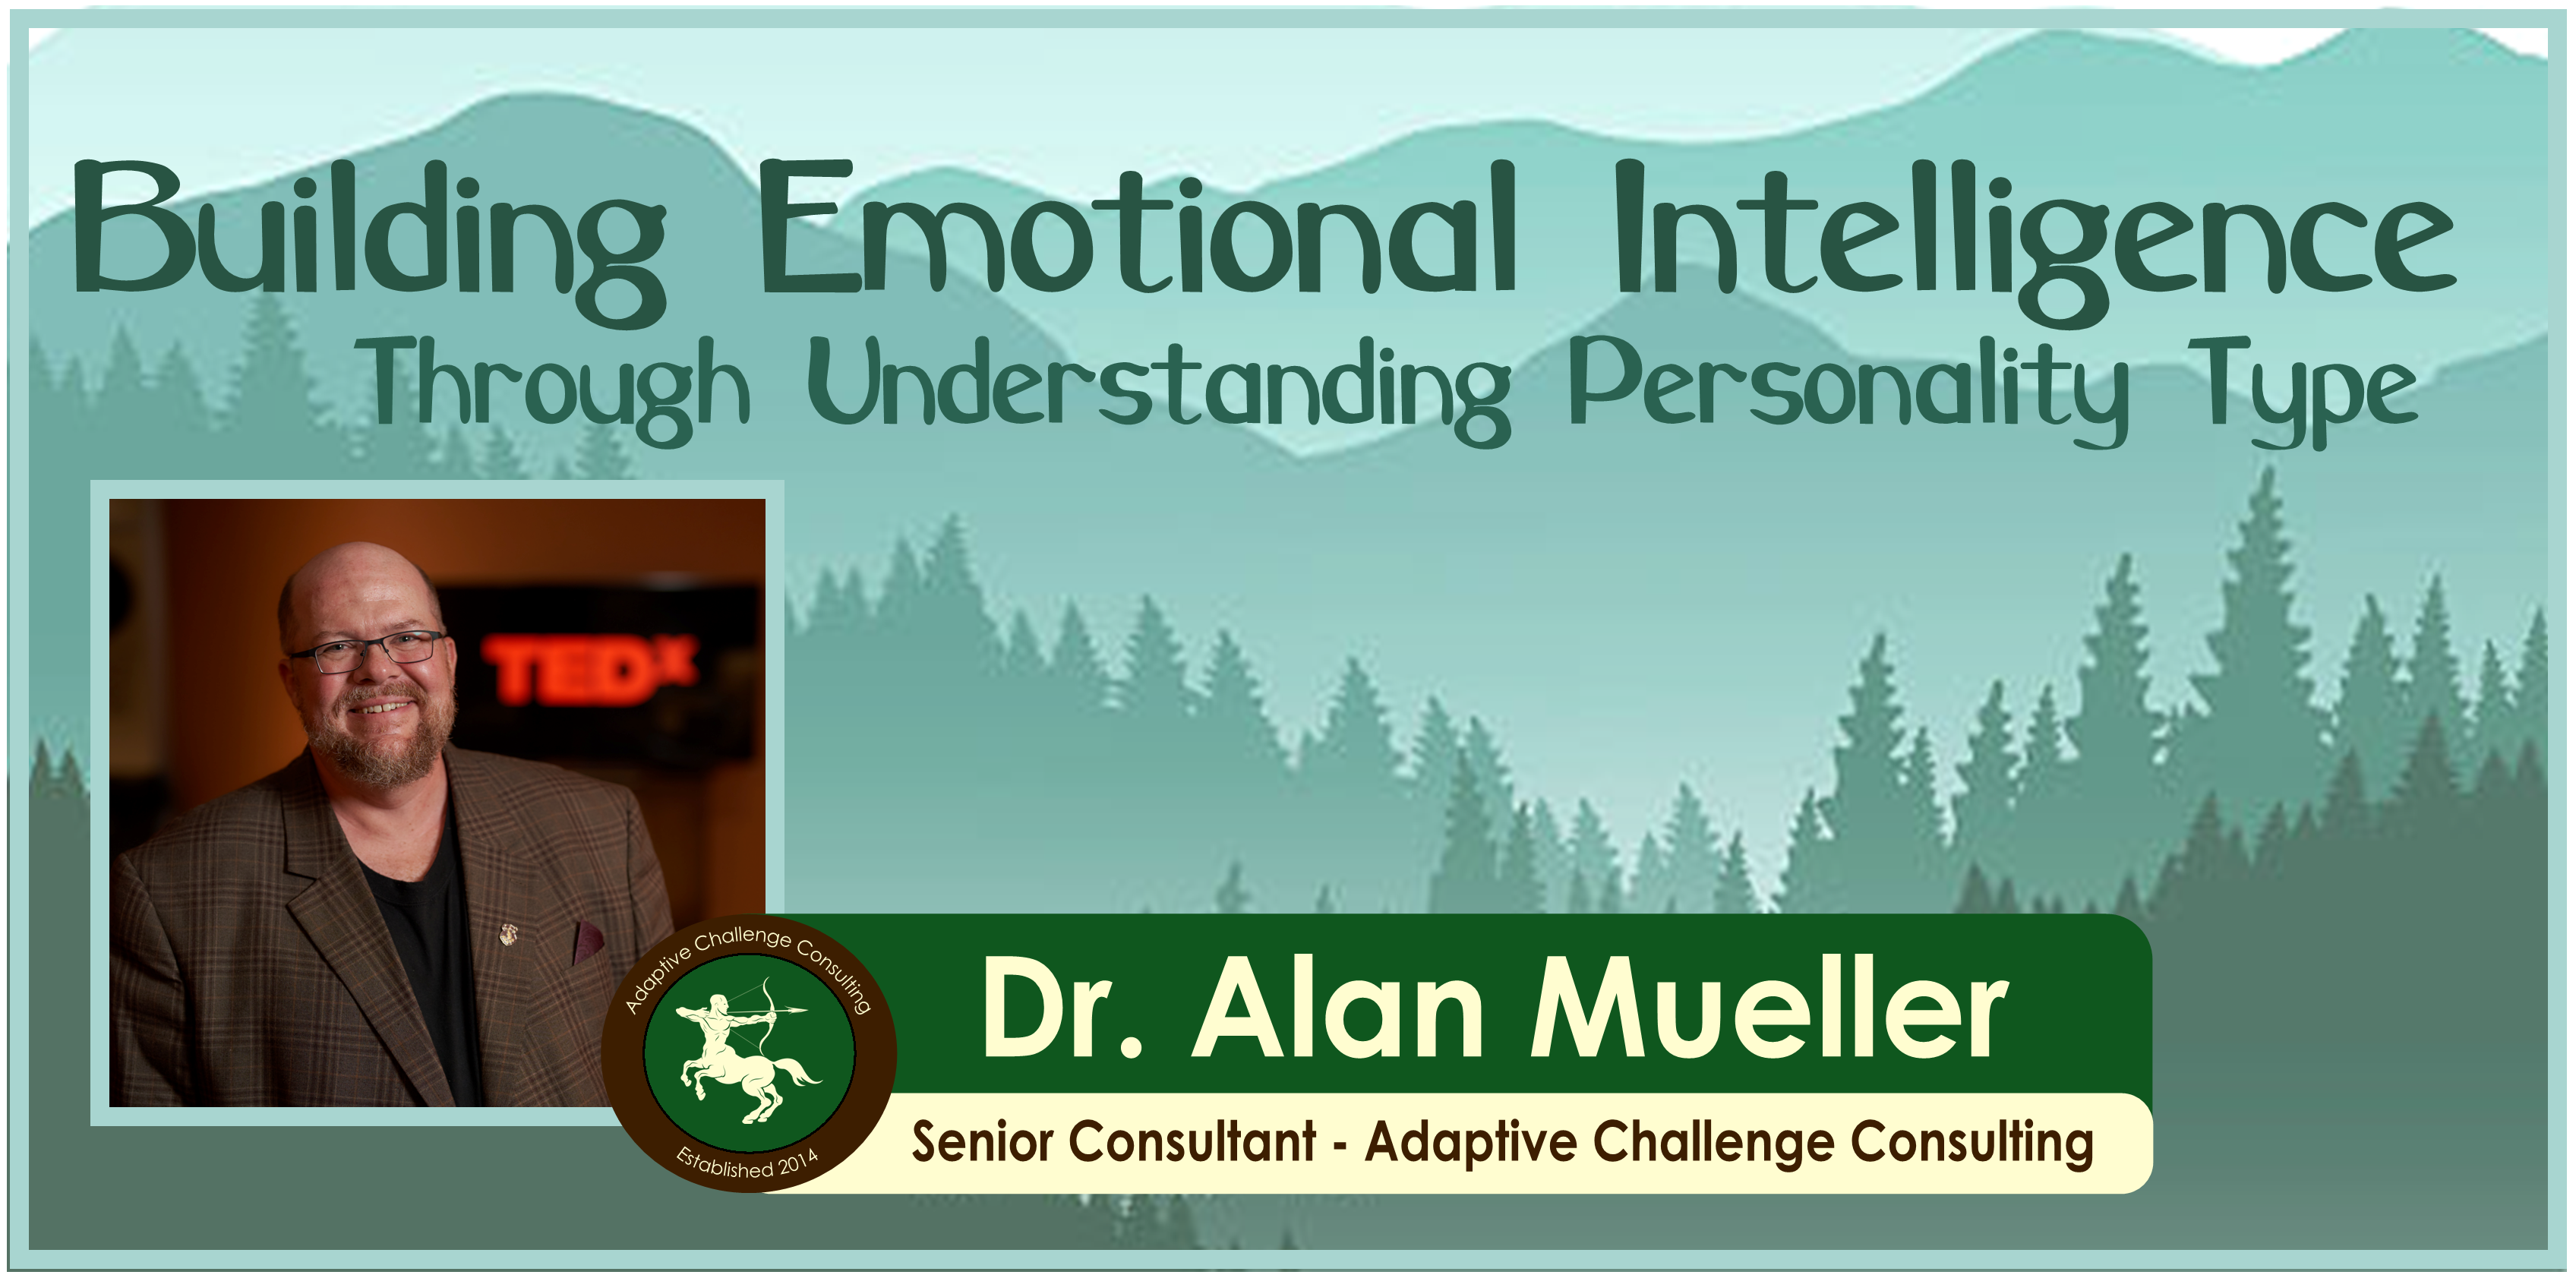 Building Emotional Intelligence Through Understanding Personality Type with Dr. Alan Mueller